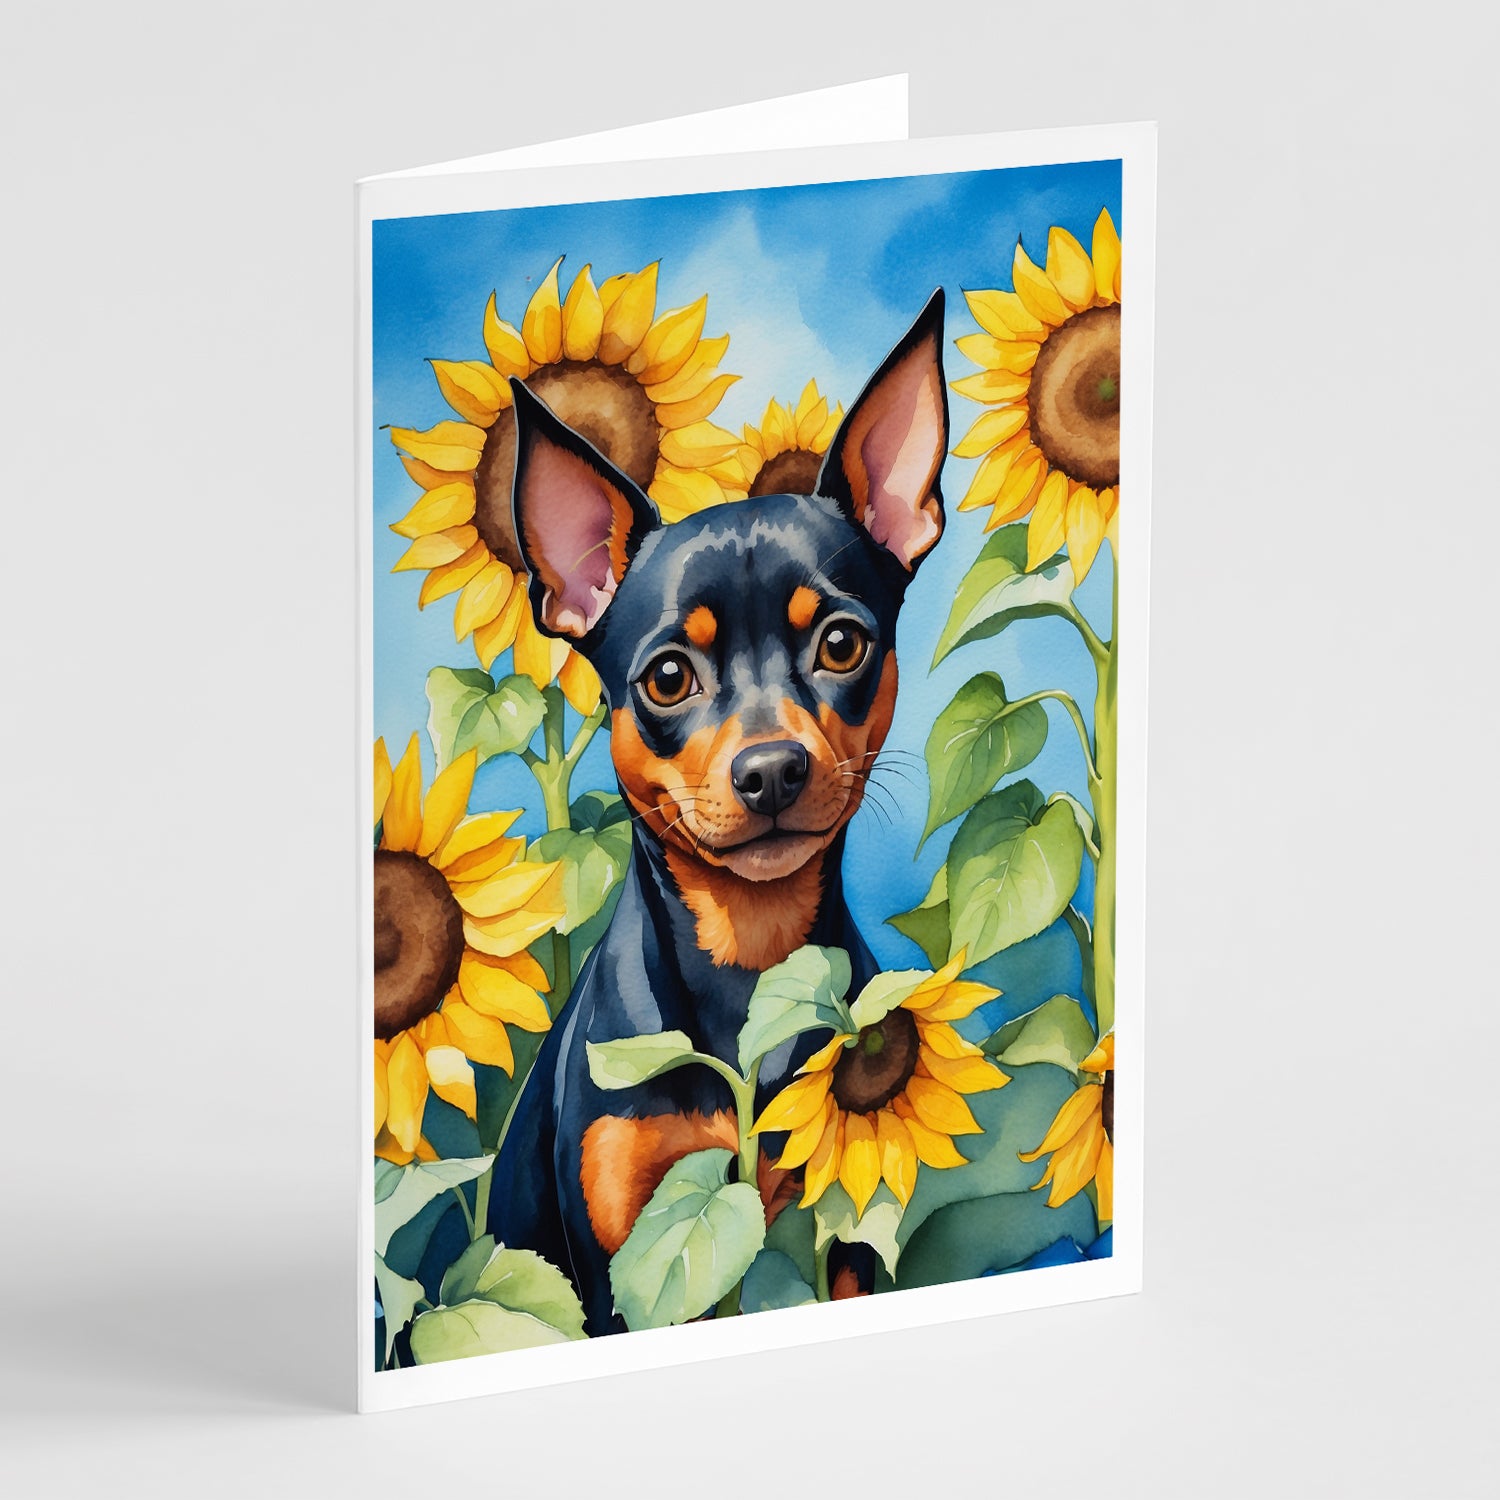 Buy this Miniature Pinscher in Sunflowers Greeting Cards Pack of 8